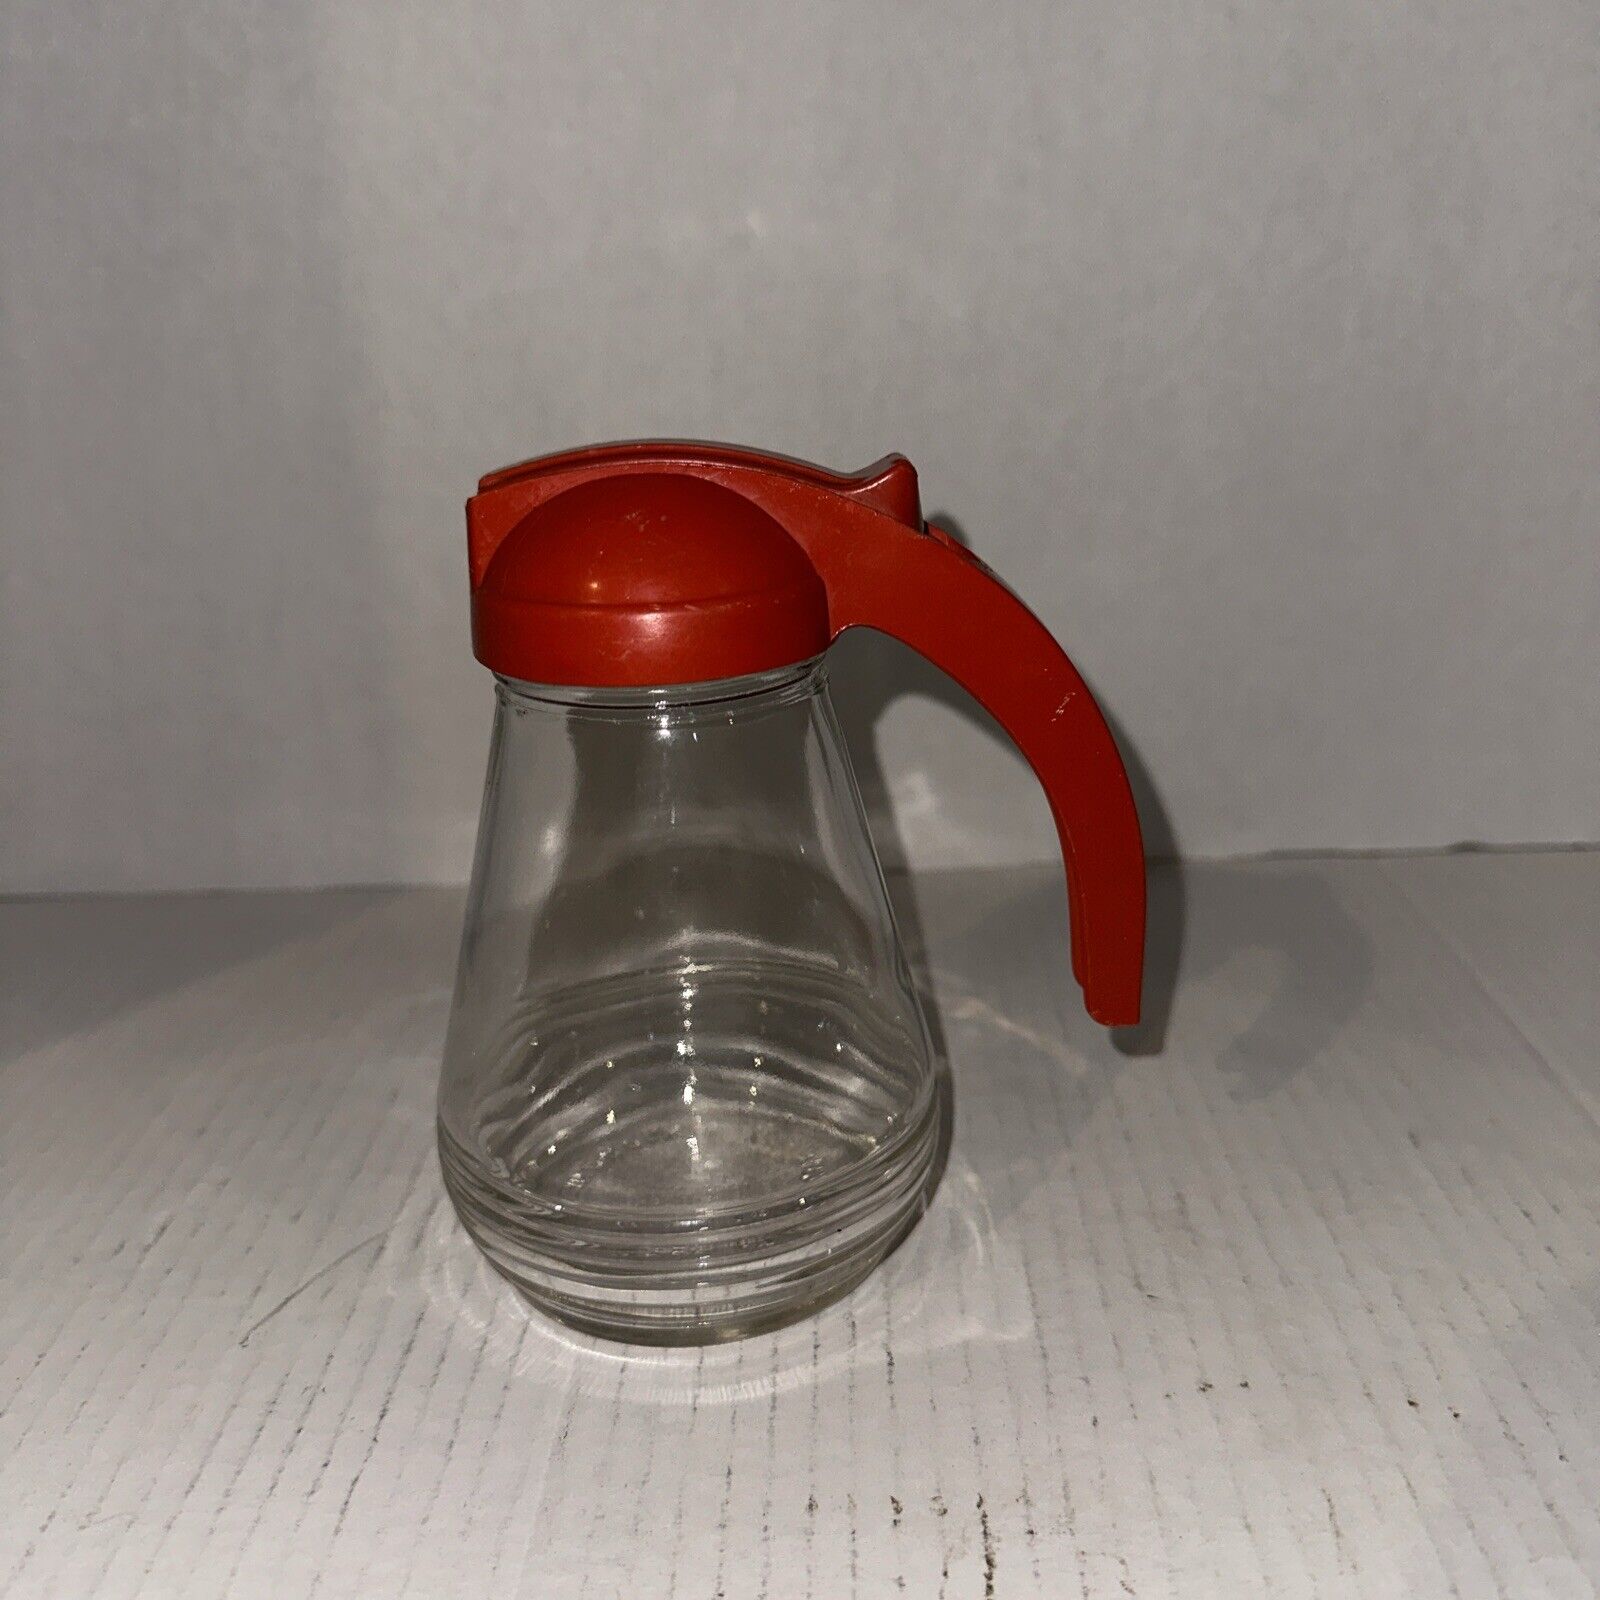 Vintage Federal Tool Corp. Syrup Dispenser Red Top. Nice